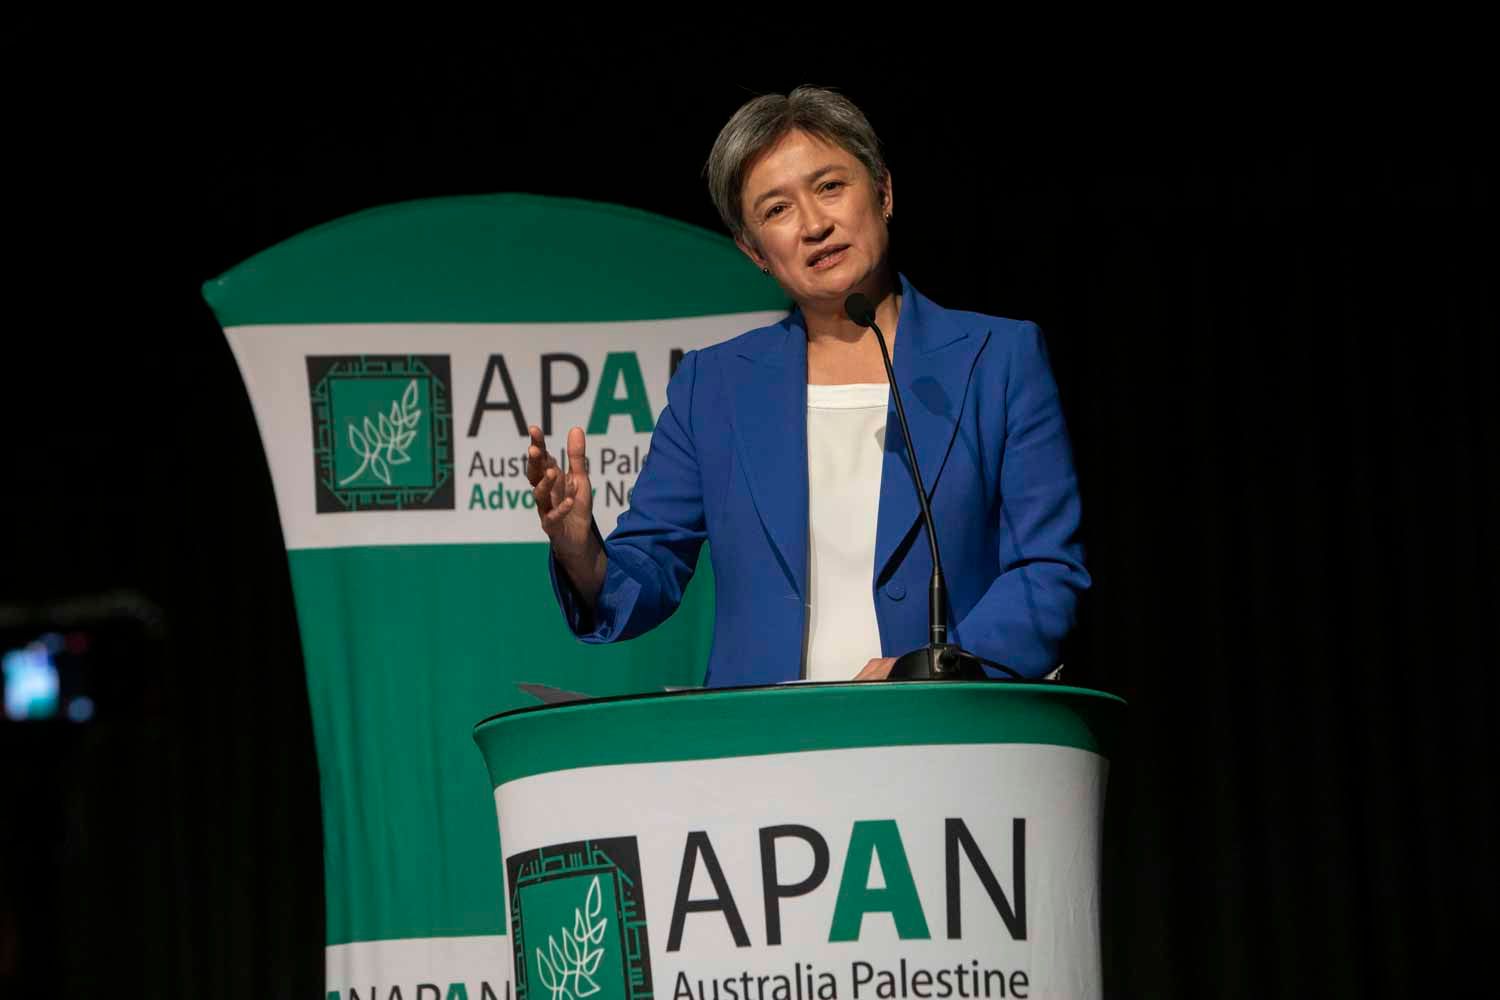 Photo of Penny Wong with APAN banner